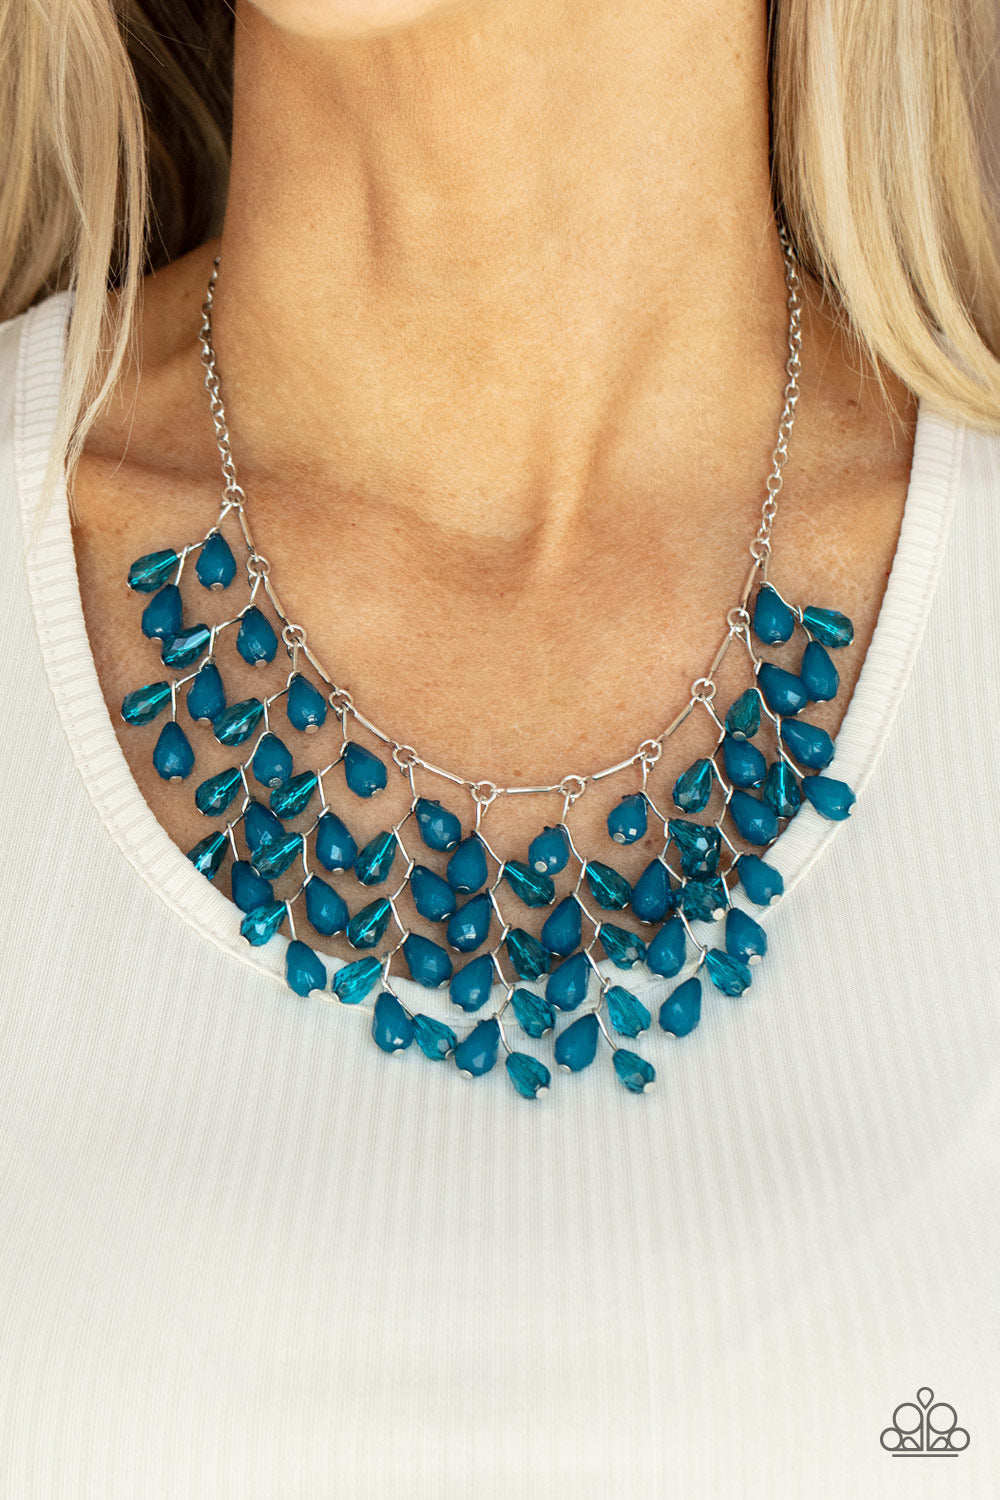 Paparazzi Accessories Garden Fairytale - Blue Necklaces a shimmery collection of opaque and clear crystal-like Mykonos Blue teardrop beads delicately cluster along a linked strand of silver bars, creating an ethereally leafy fringe below the collar. Features an adjustable clasp closure.